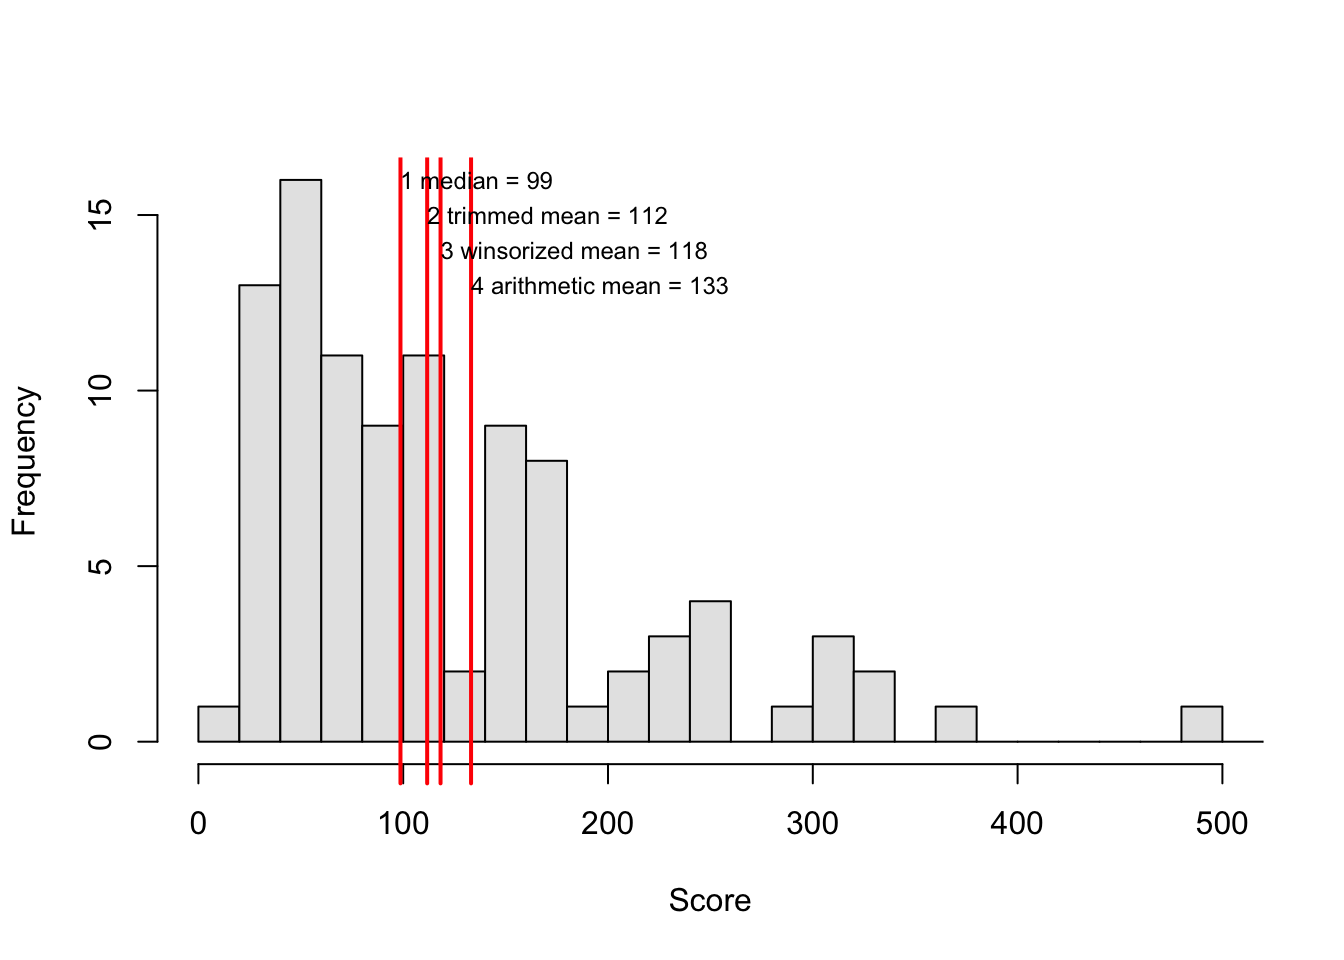 Histogram of a variable with positively skewed (asymmetric) frequency distribution, with (1) the median, (2) the 10% trimmed mean, (3) the 10% winsorized mean, and (4) the arithmetic mean, indicated. The observed scores are marked along the horizontal axis.